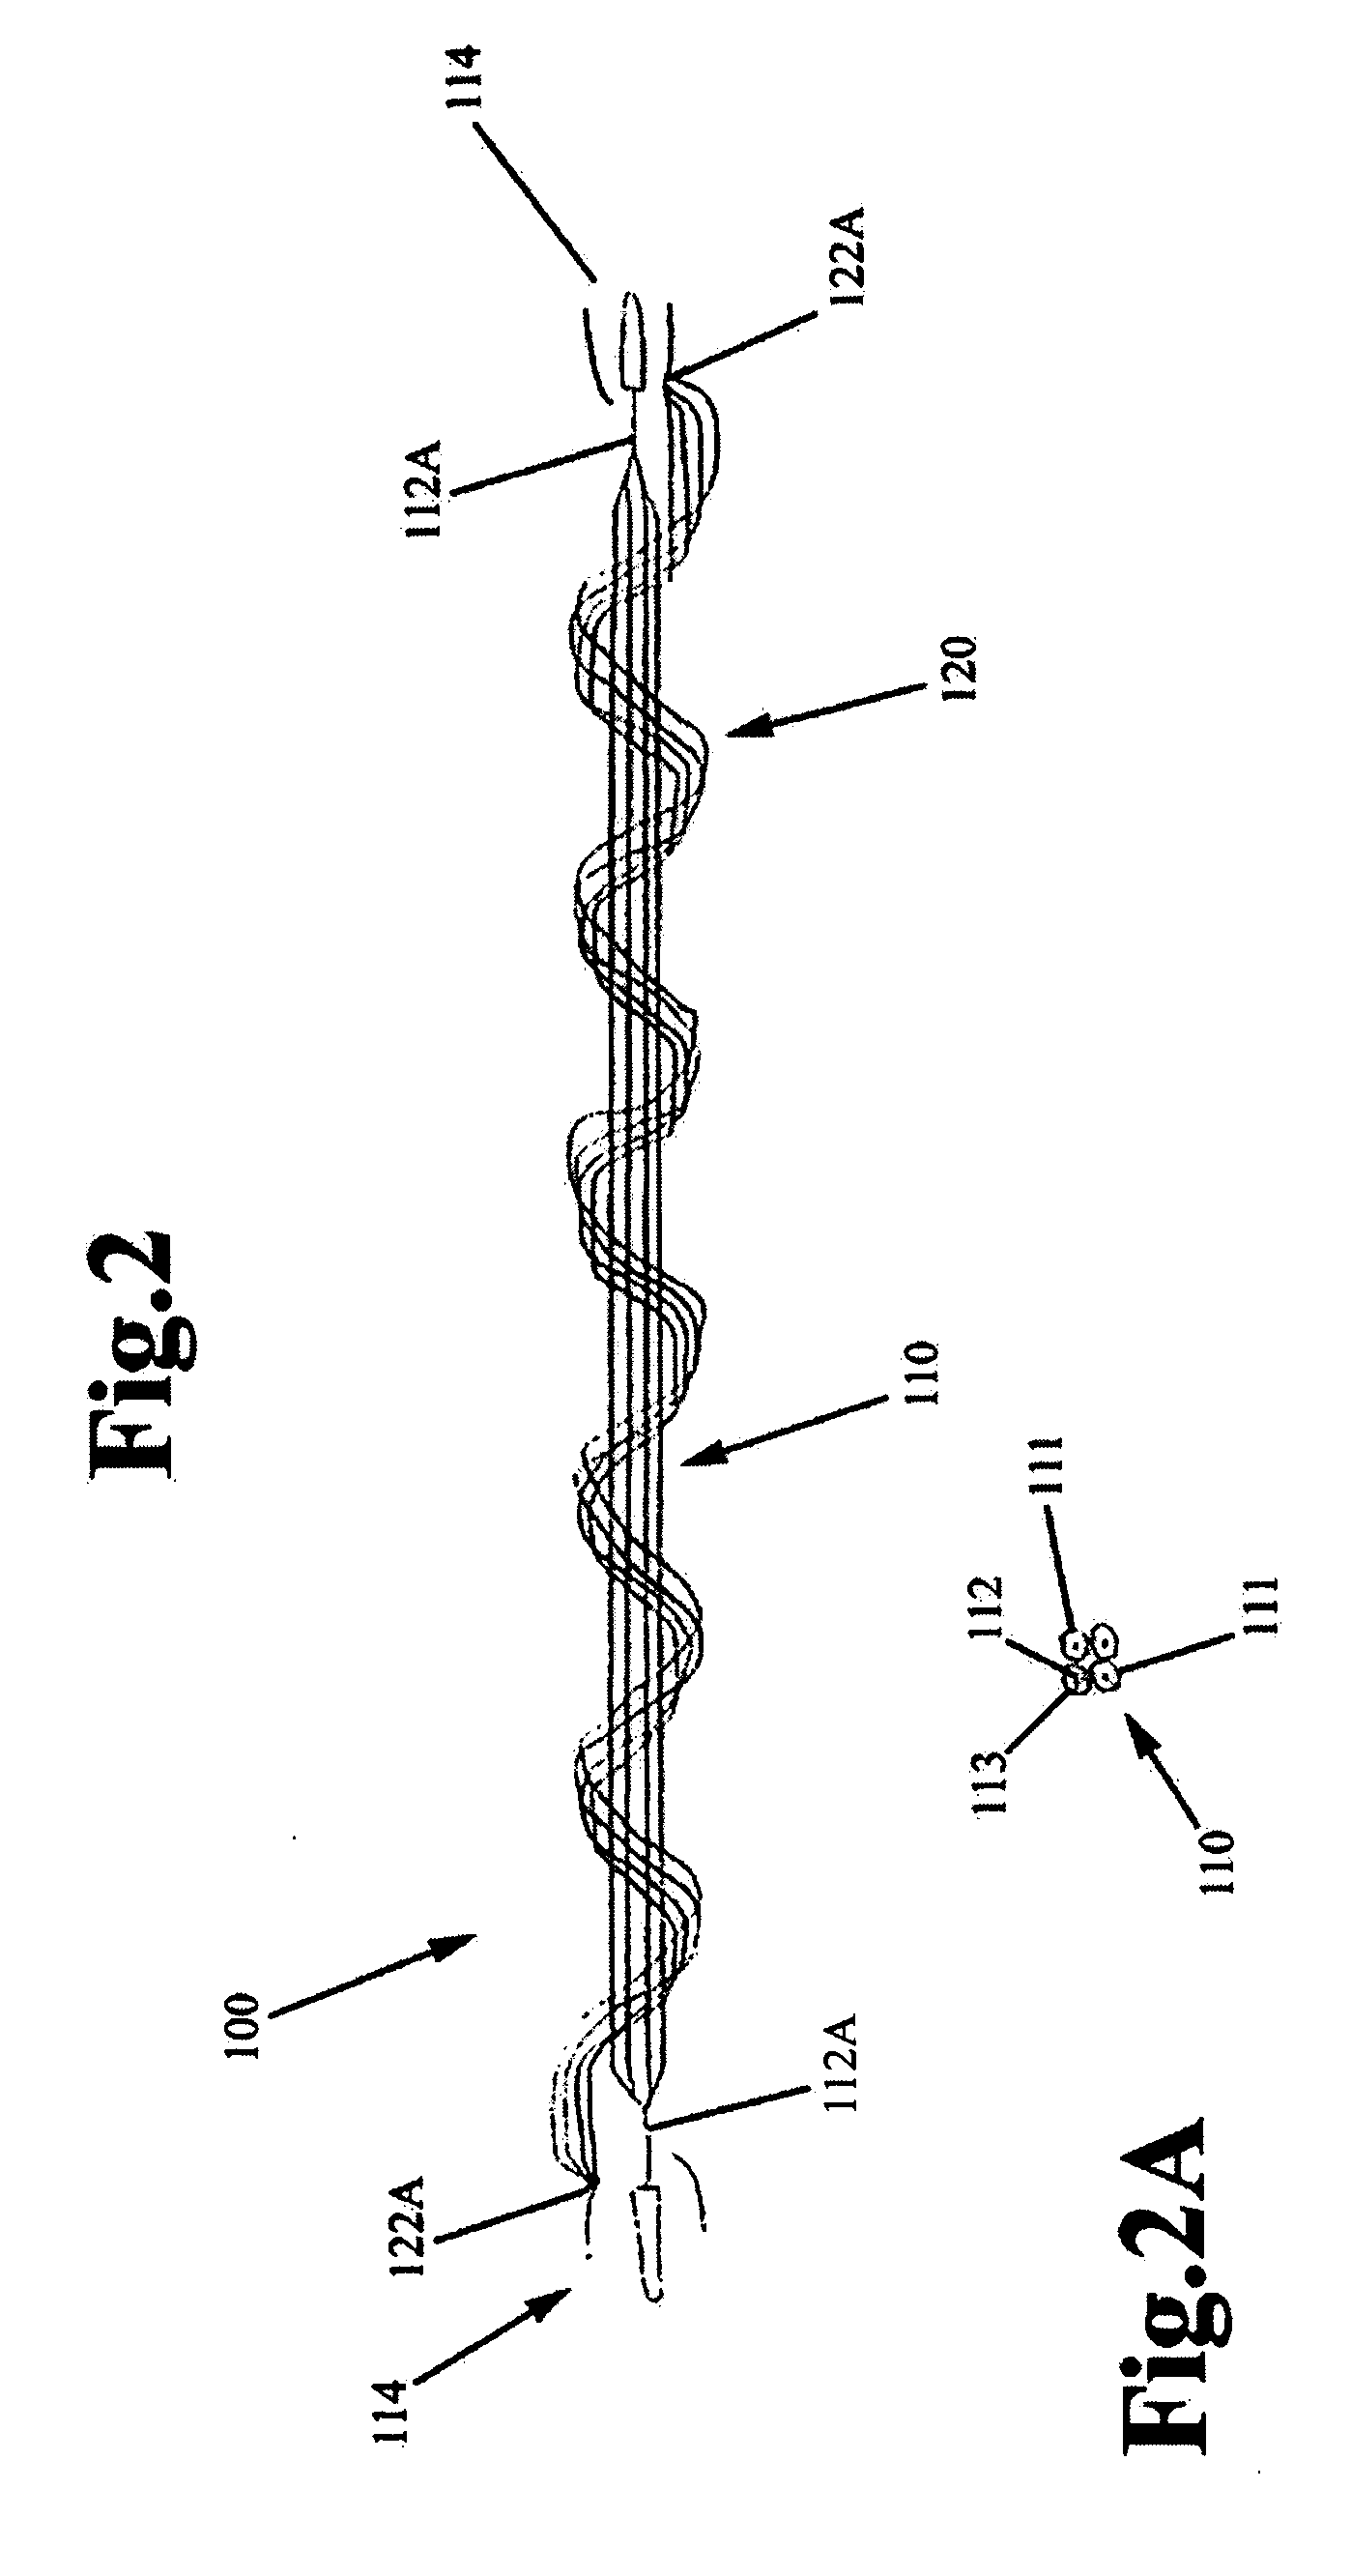 Electrical wiring device system